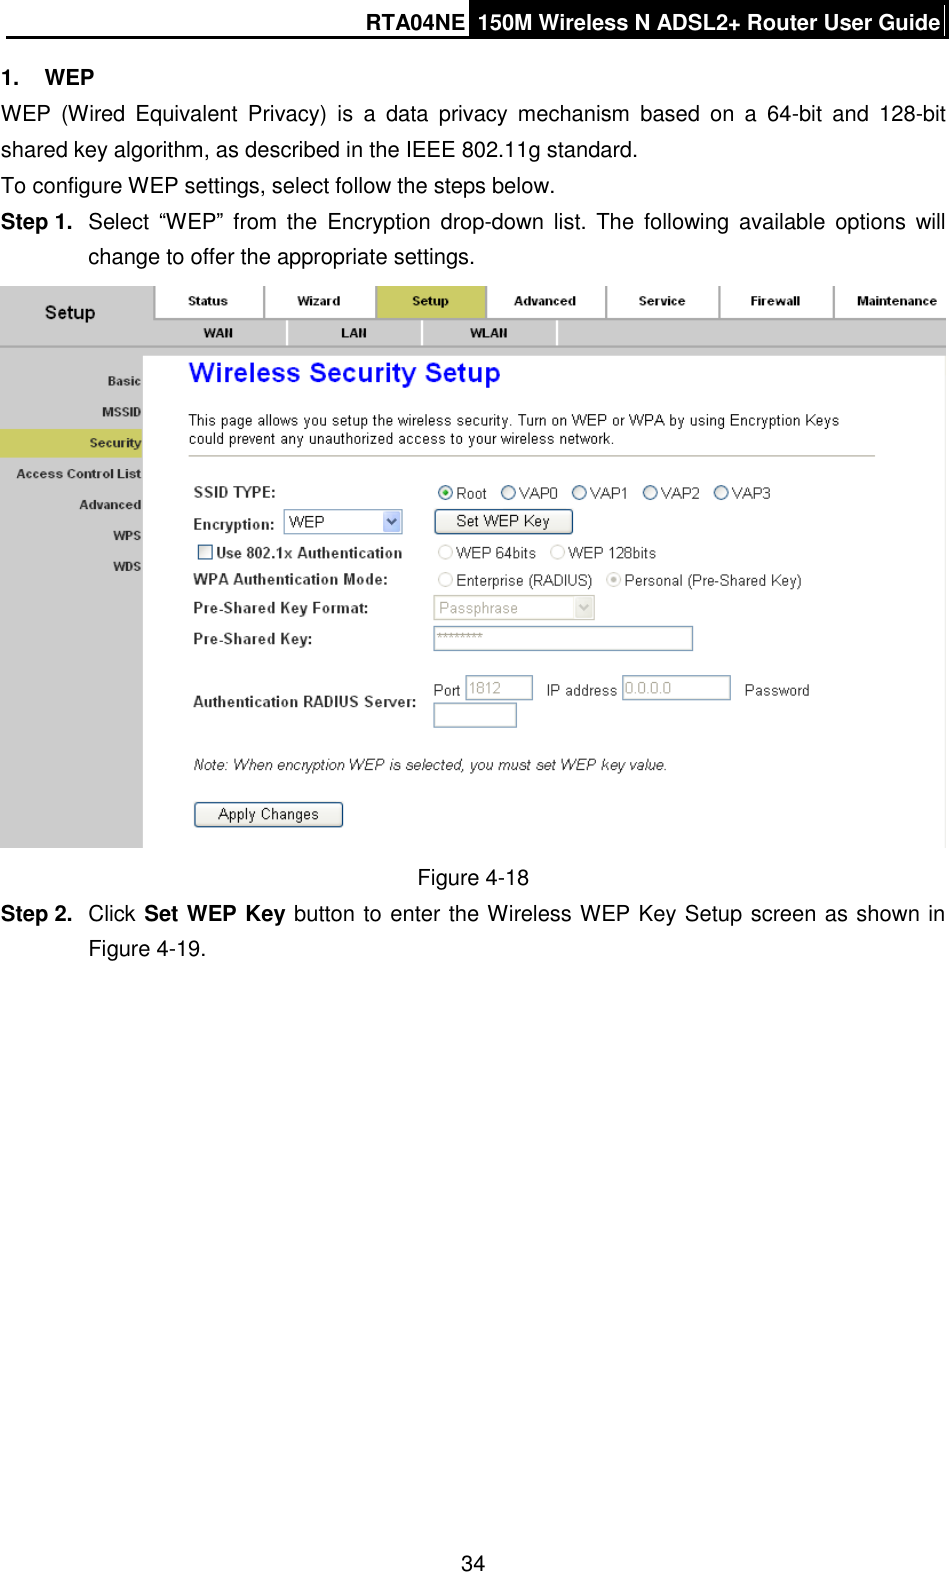 RTA04NE 150M Wireless N ADSL2+ Router User Guide  34 1.  WEP WEP  (Wired  Equivalent  Privacy)  is  a  data  privacy  mechanism  based  on  a  64-bit  and  128-bit shared key algorithm, as described in the IEEE 802.11g standard.   To configure WEP settings, select follow the steps below. Step 1.  Select  “WEP”  from  the  Encryption  drop-down list. The  following  available  options  will change to offer the appropriate settings.    Figure 4-18 Step 2.  Click Set WEP Key button to enter the Wireless WEP Key Setup screen as shown in Figure 4-19.   